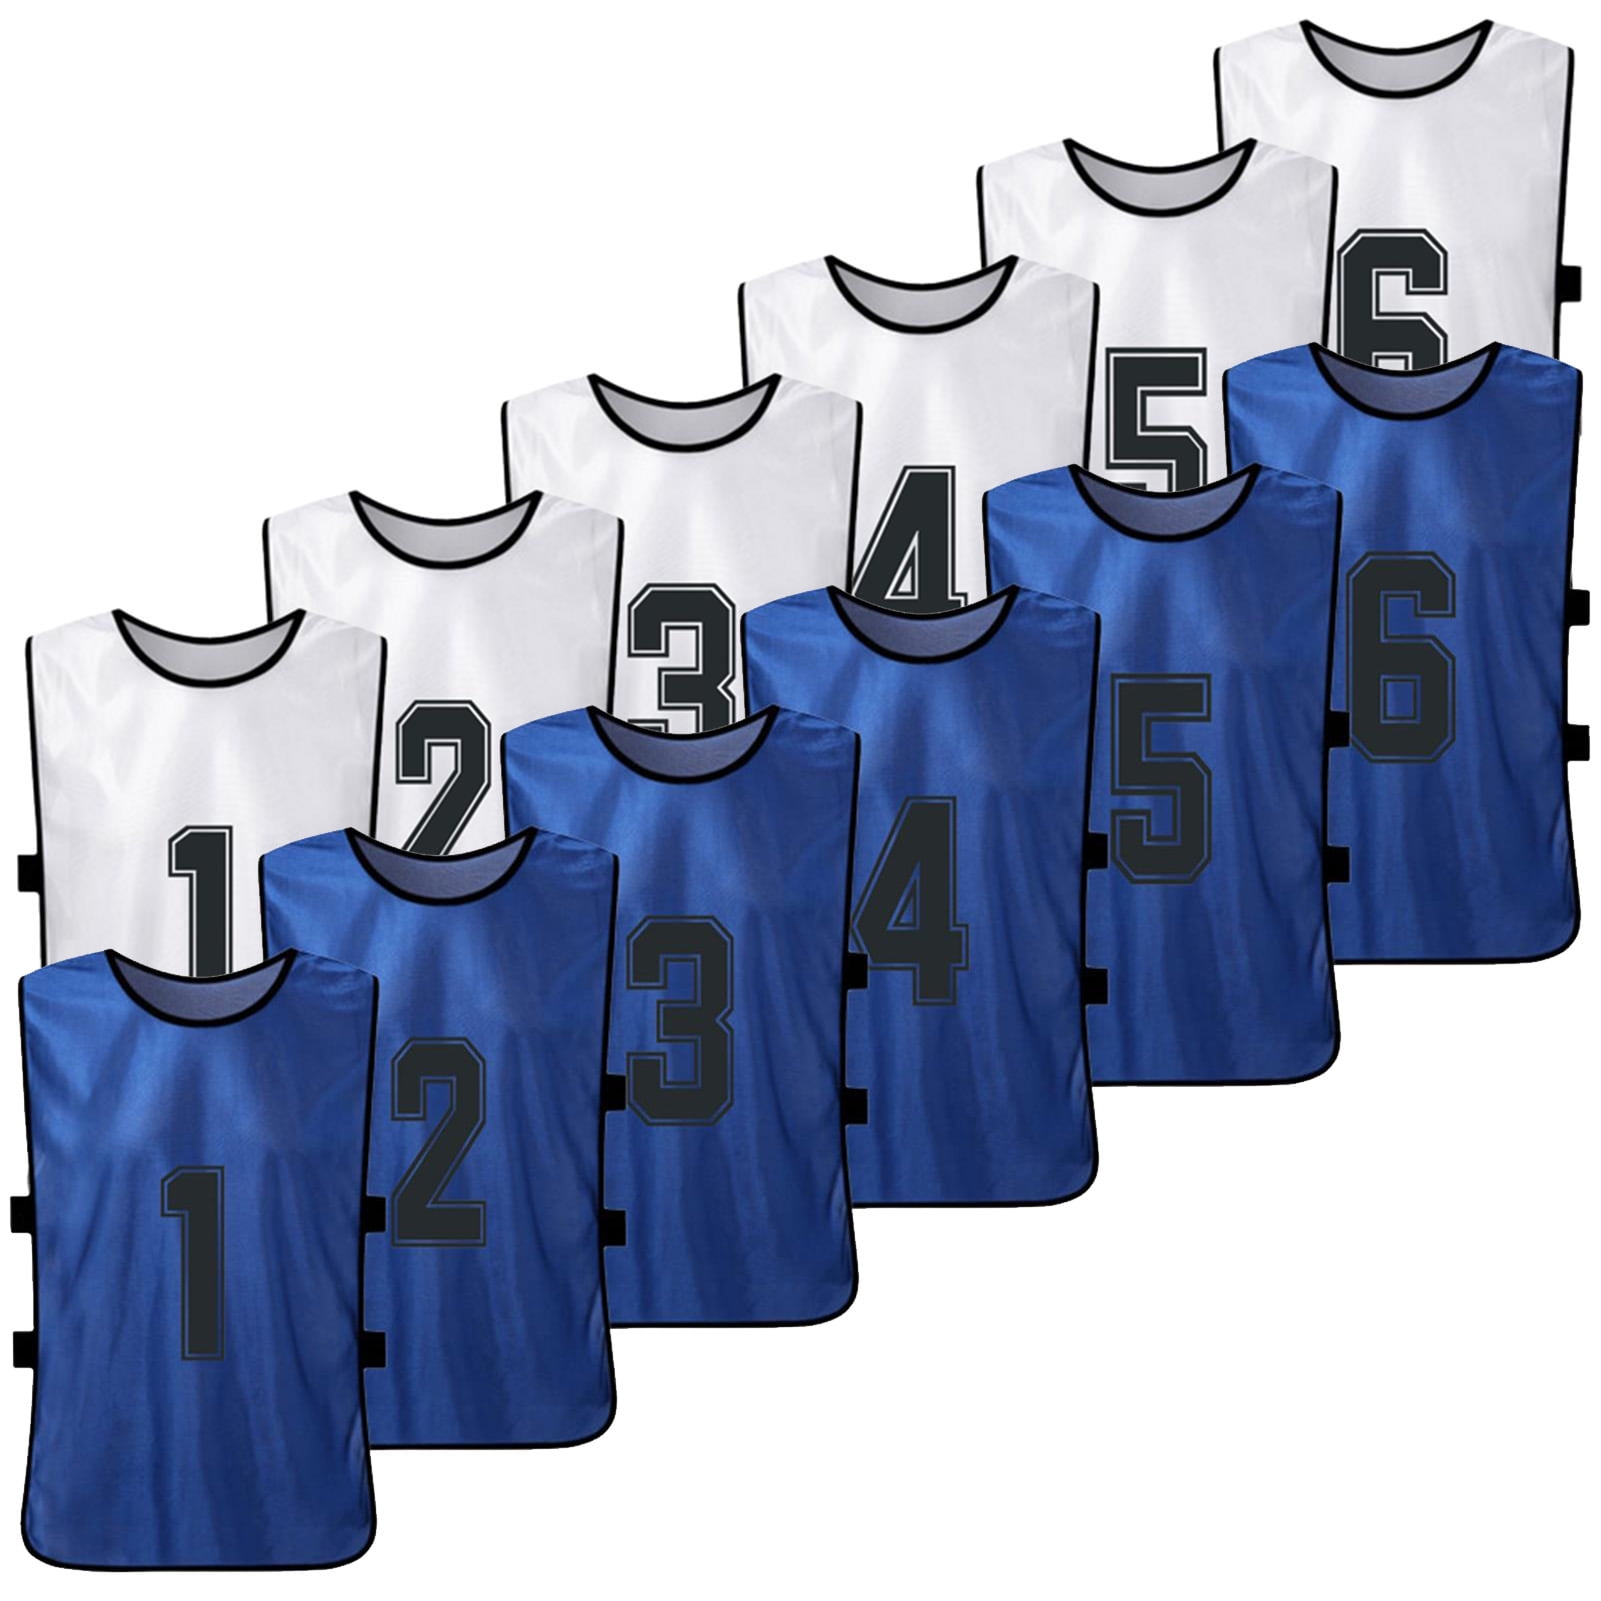 12 pcs Outdoor Sports Vests Scrimmage Soccer Training Breathable Adults Jersey 